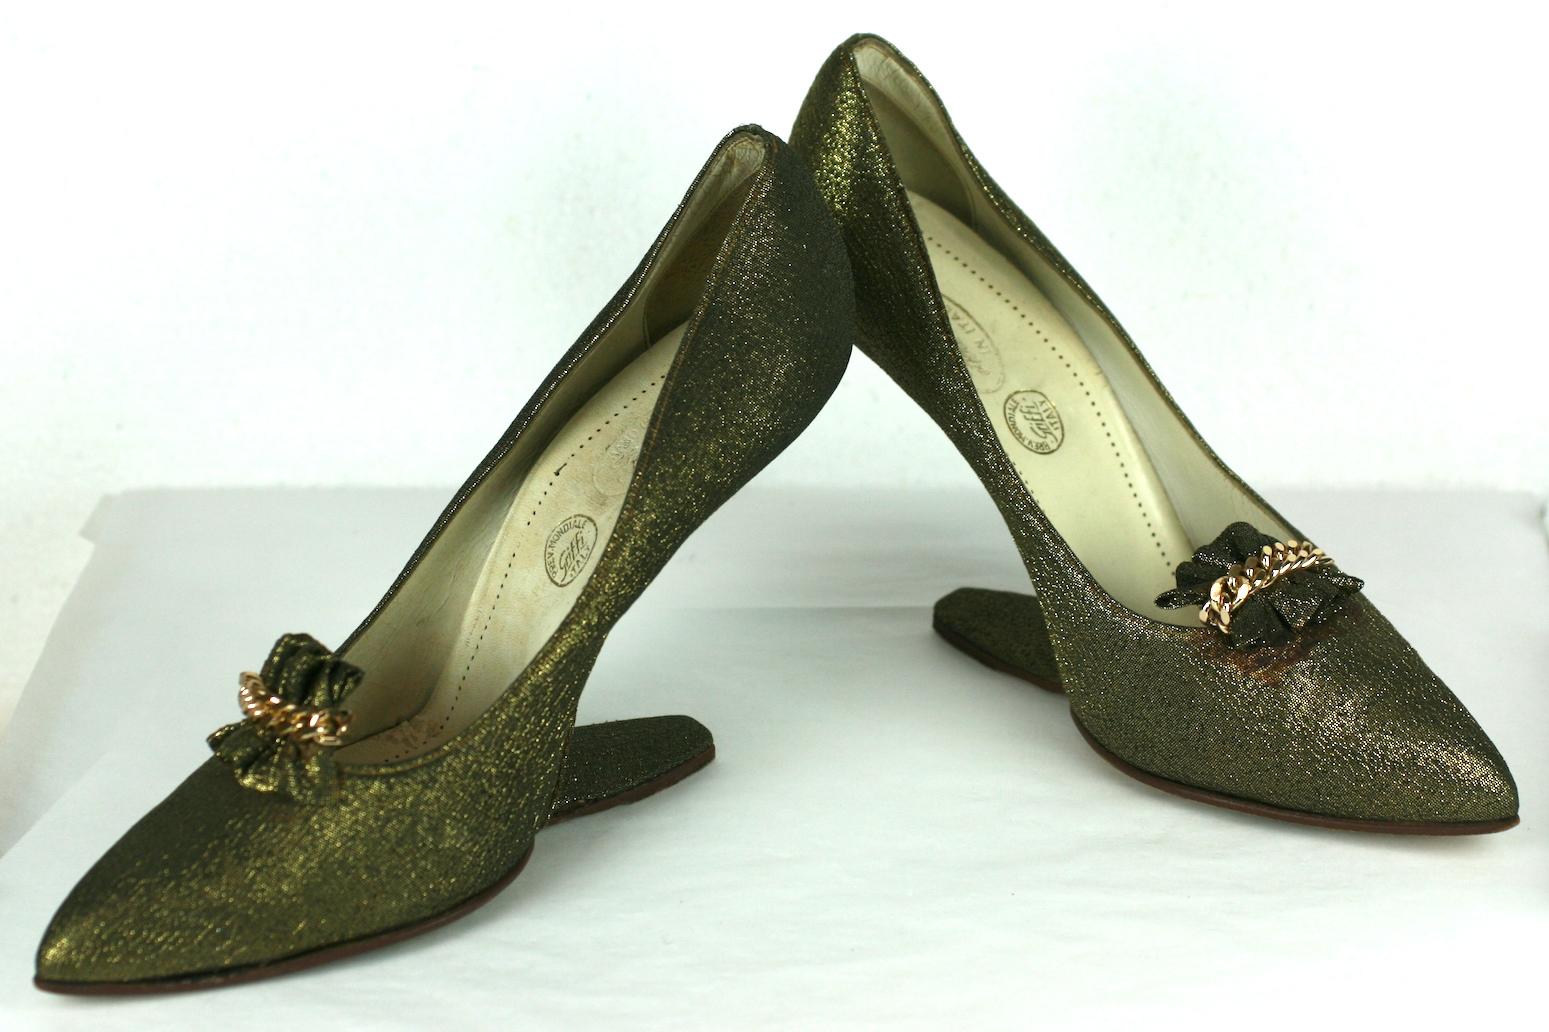 Amazing Italian Gold Lame Suspended Pumps by Griffi Italy, hand crafted Florentine in italy, Gold lame on leather with pleated bow.
Sole 2.75 wide, length inside approx 9